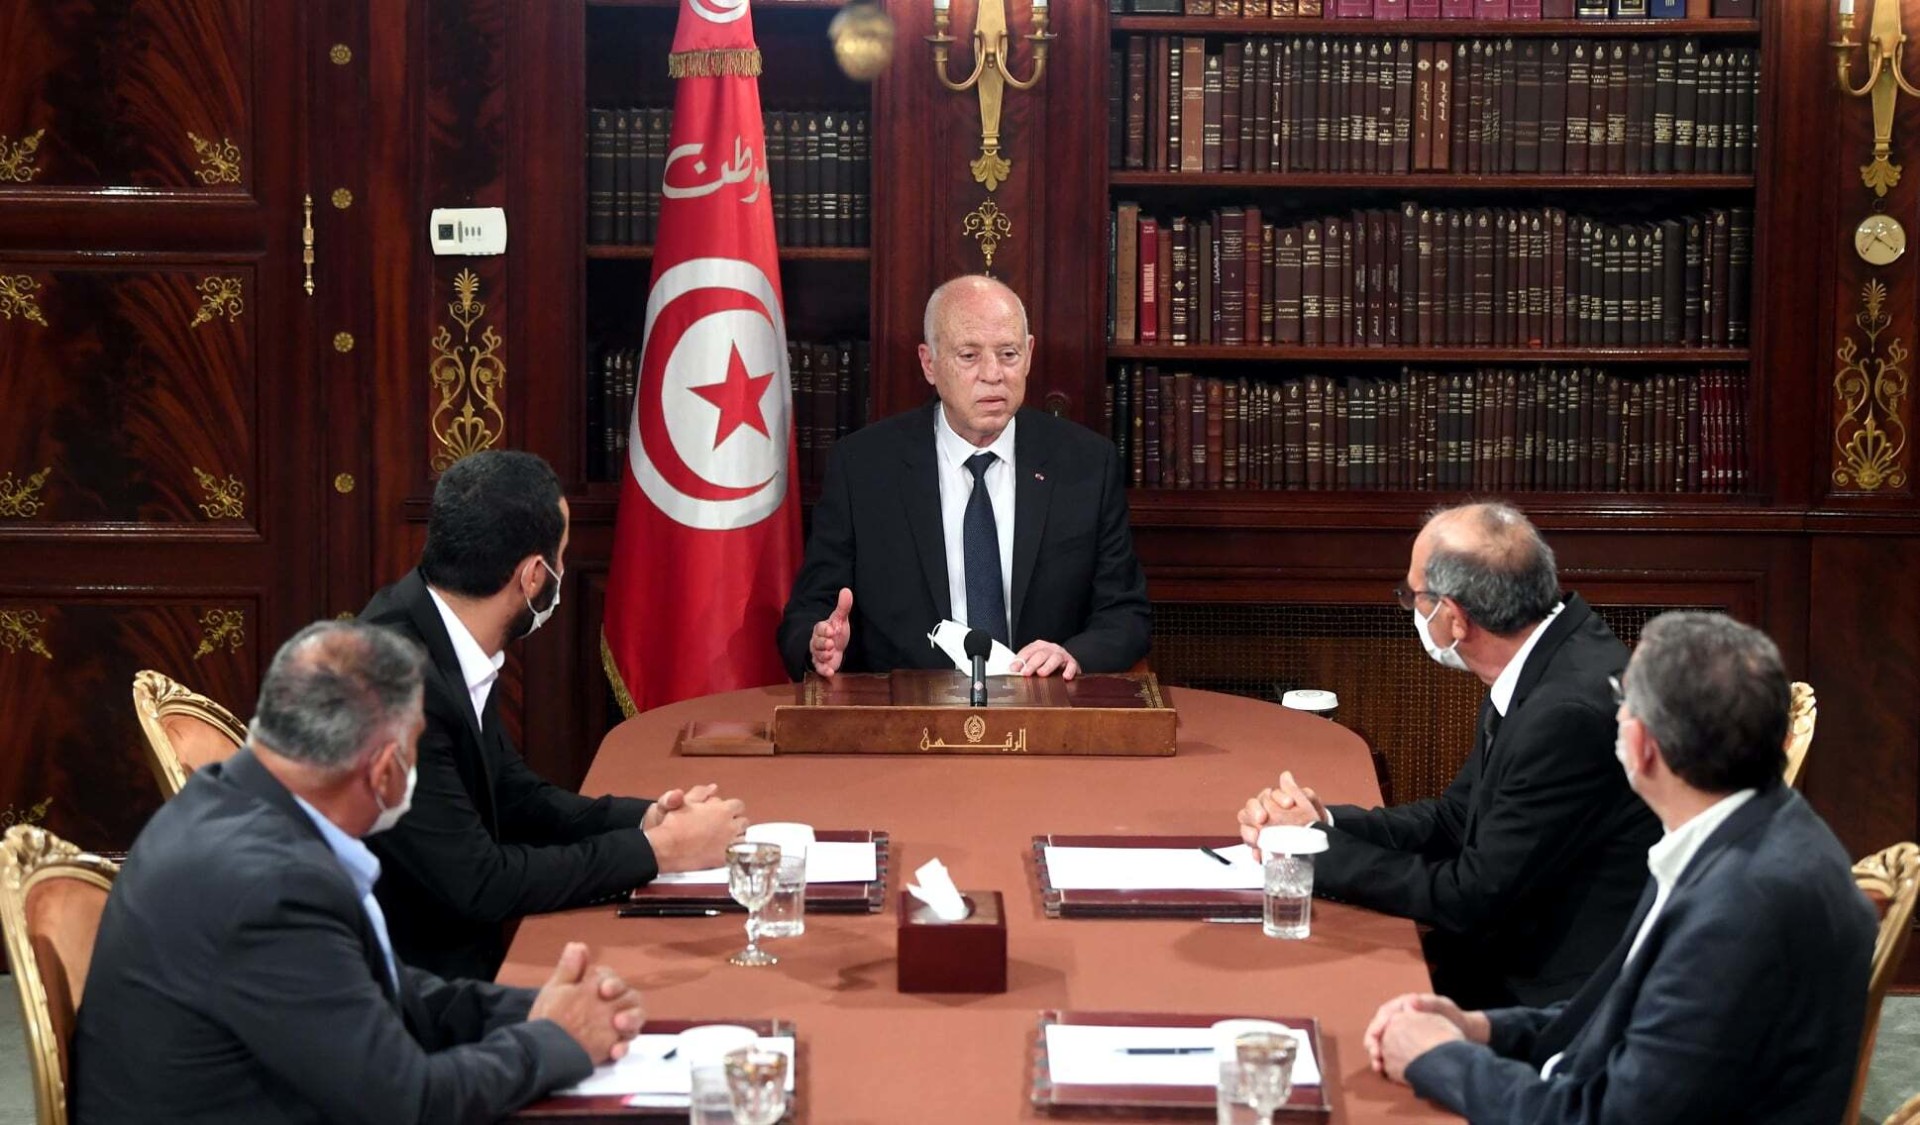 In Tunisia, It’s Uncertain That Warming a Political Freeze Will Yield a Long Thaw